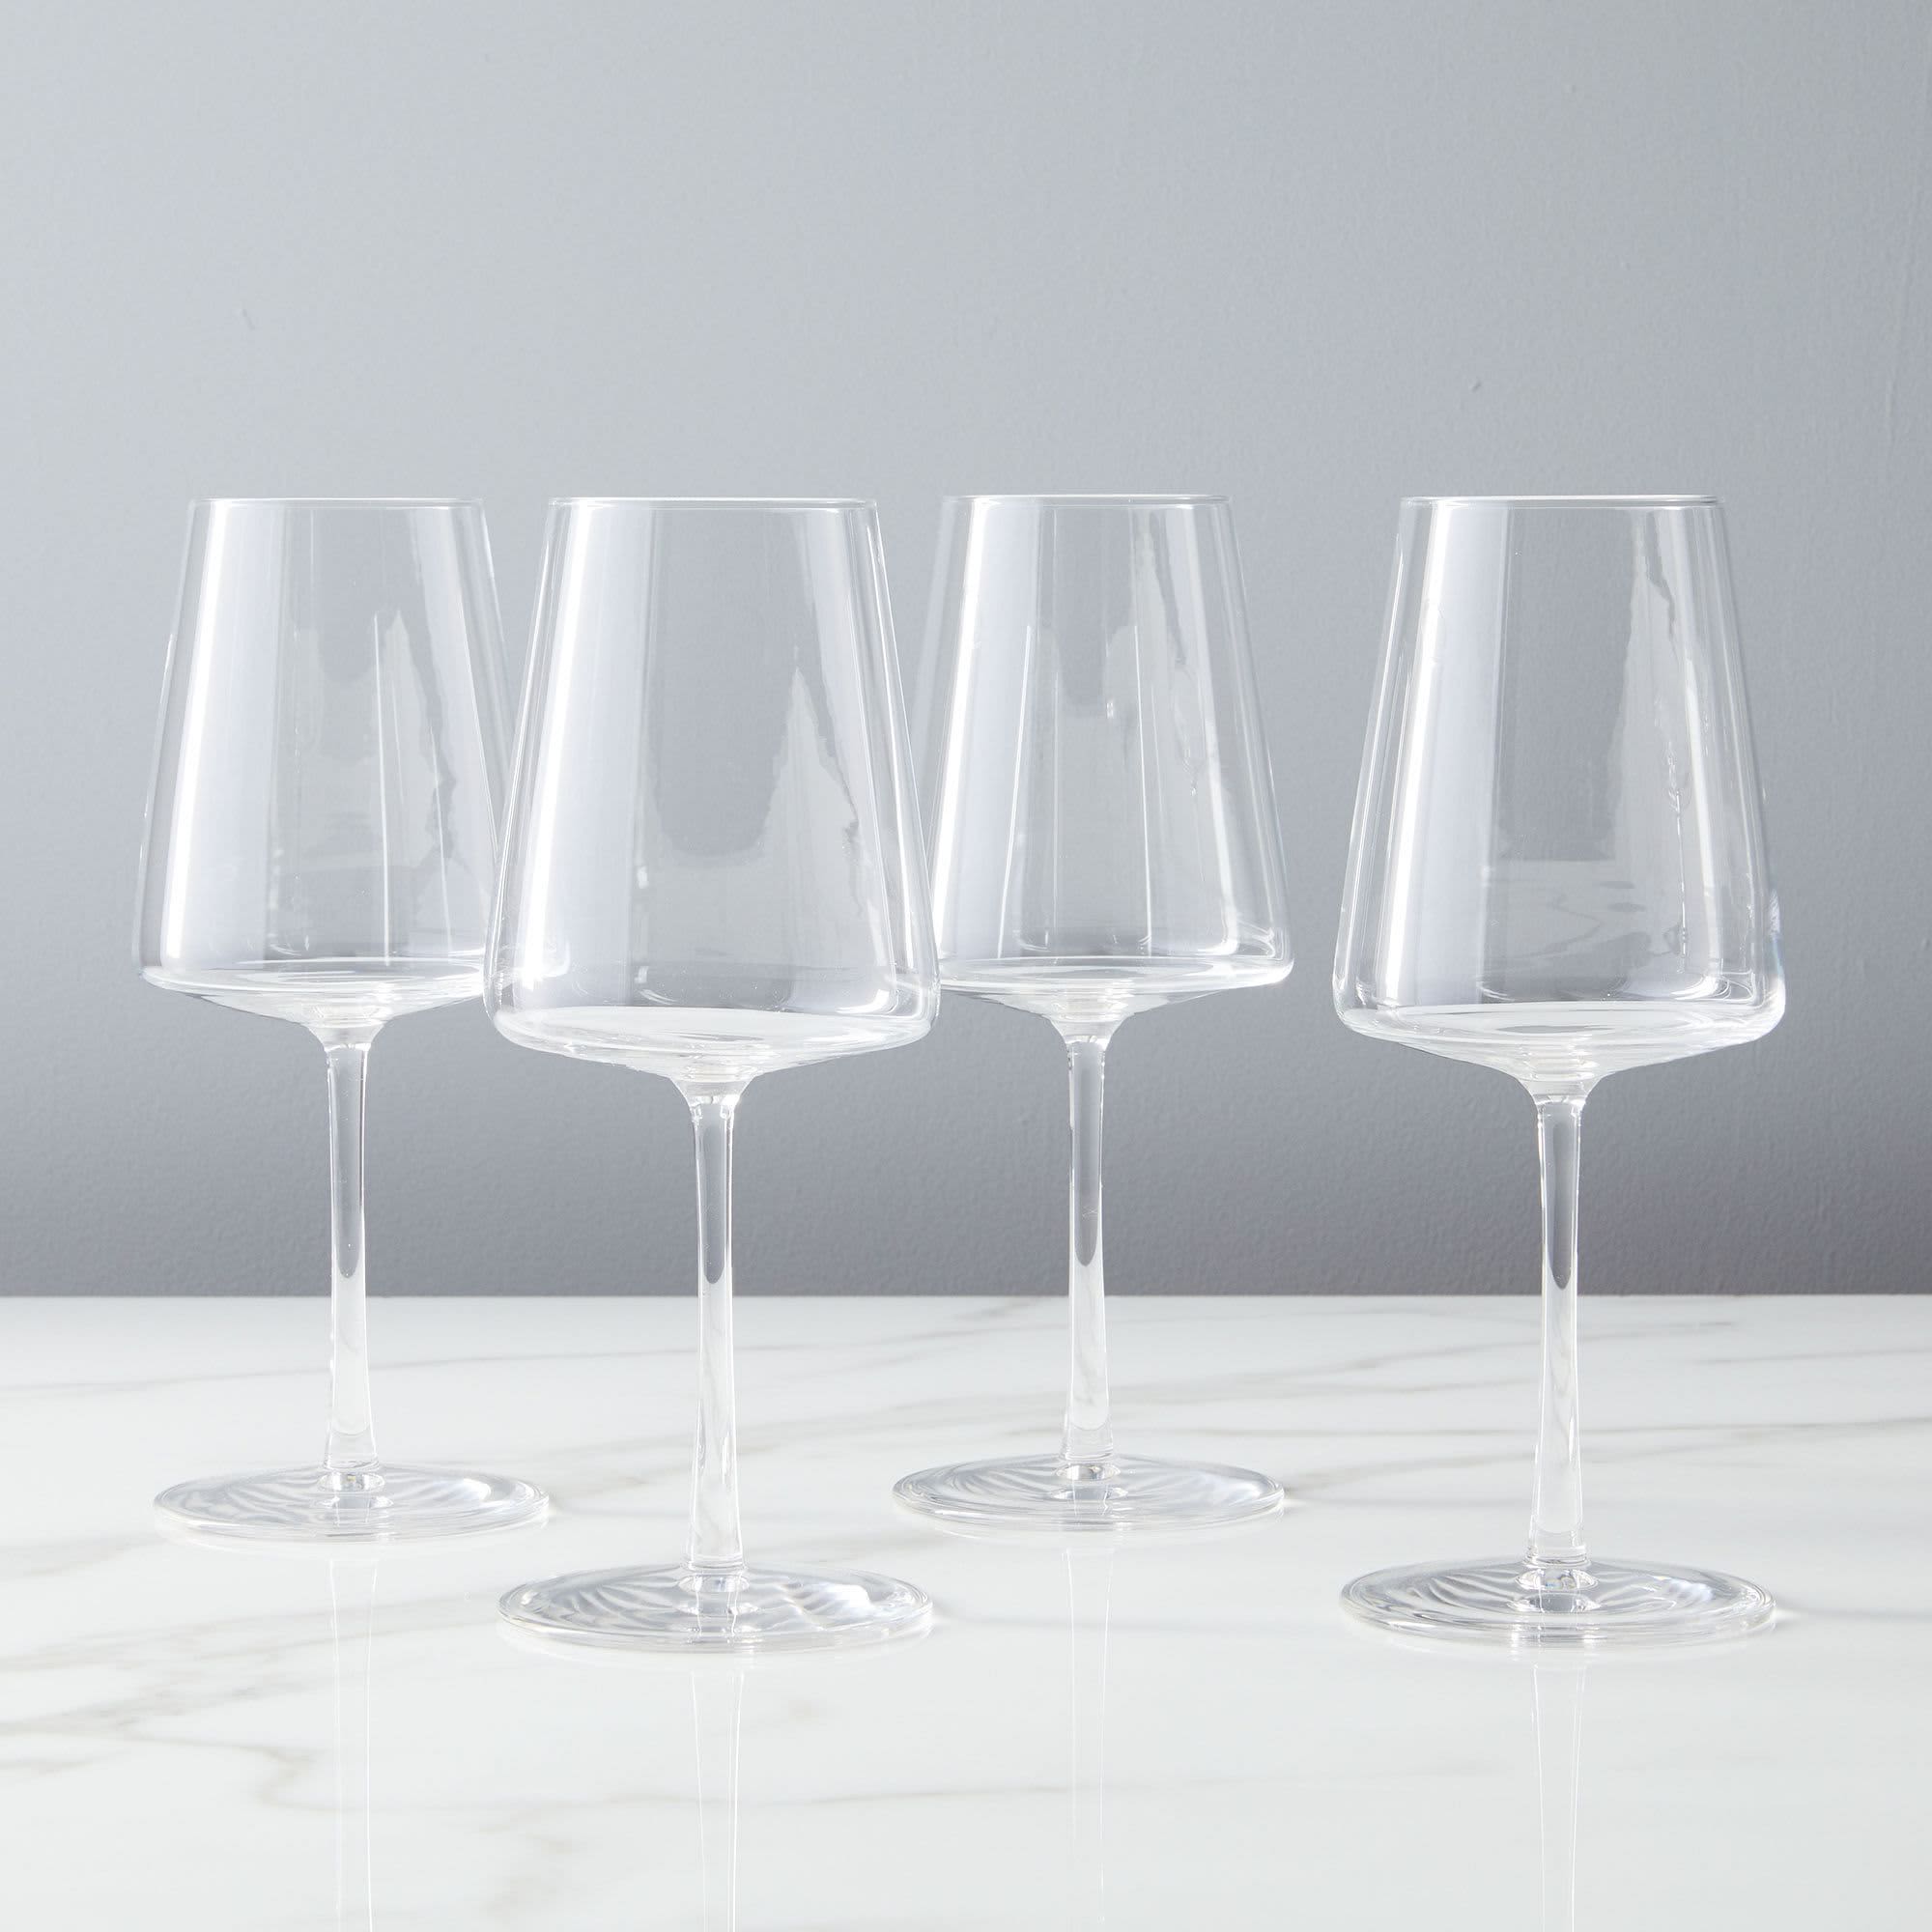 http://cdn.apartmenttherapy.info/image/upload/v1690332429/gen-workflow/product-database/West_Elm_Horizon_Lead-Free_Crystal_White_Wine_Glass_Sets.jpg